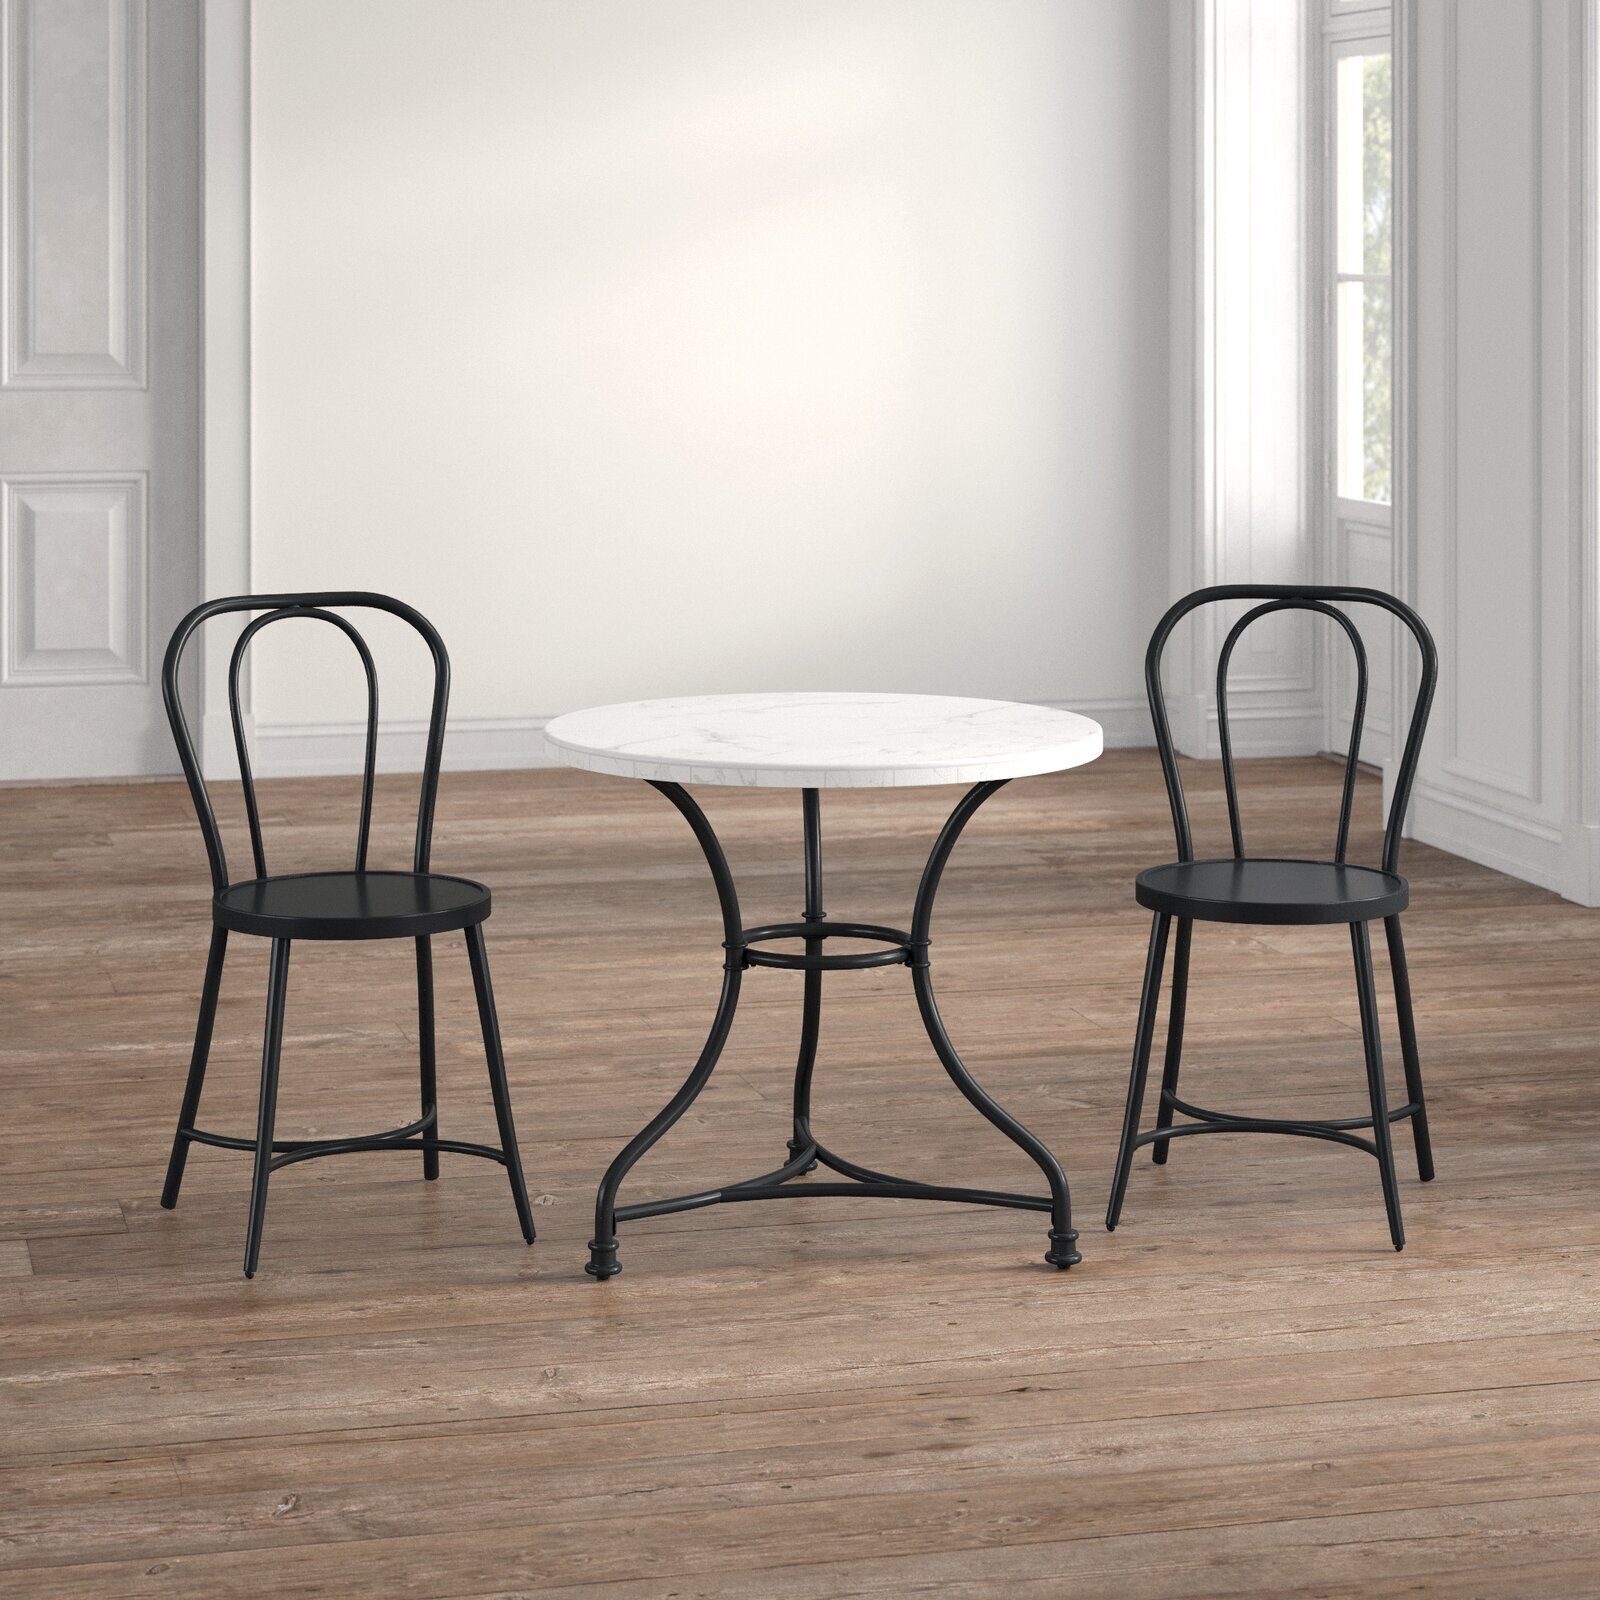 Round marble table and chairs with French flair